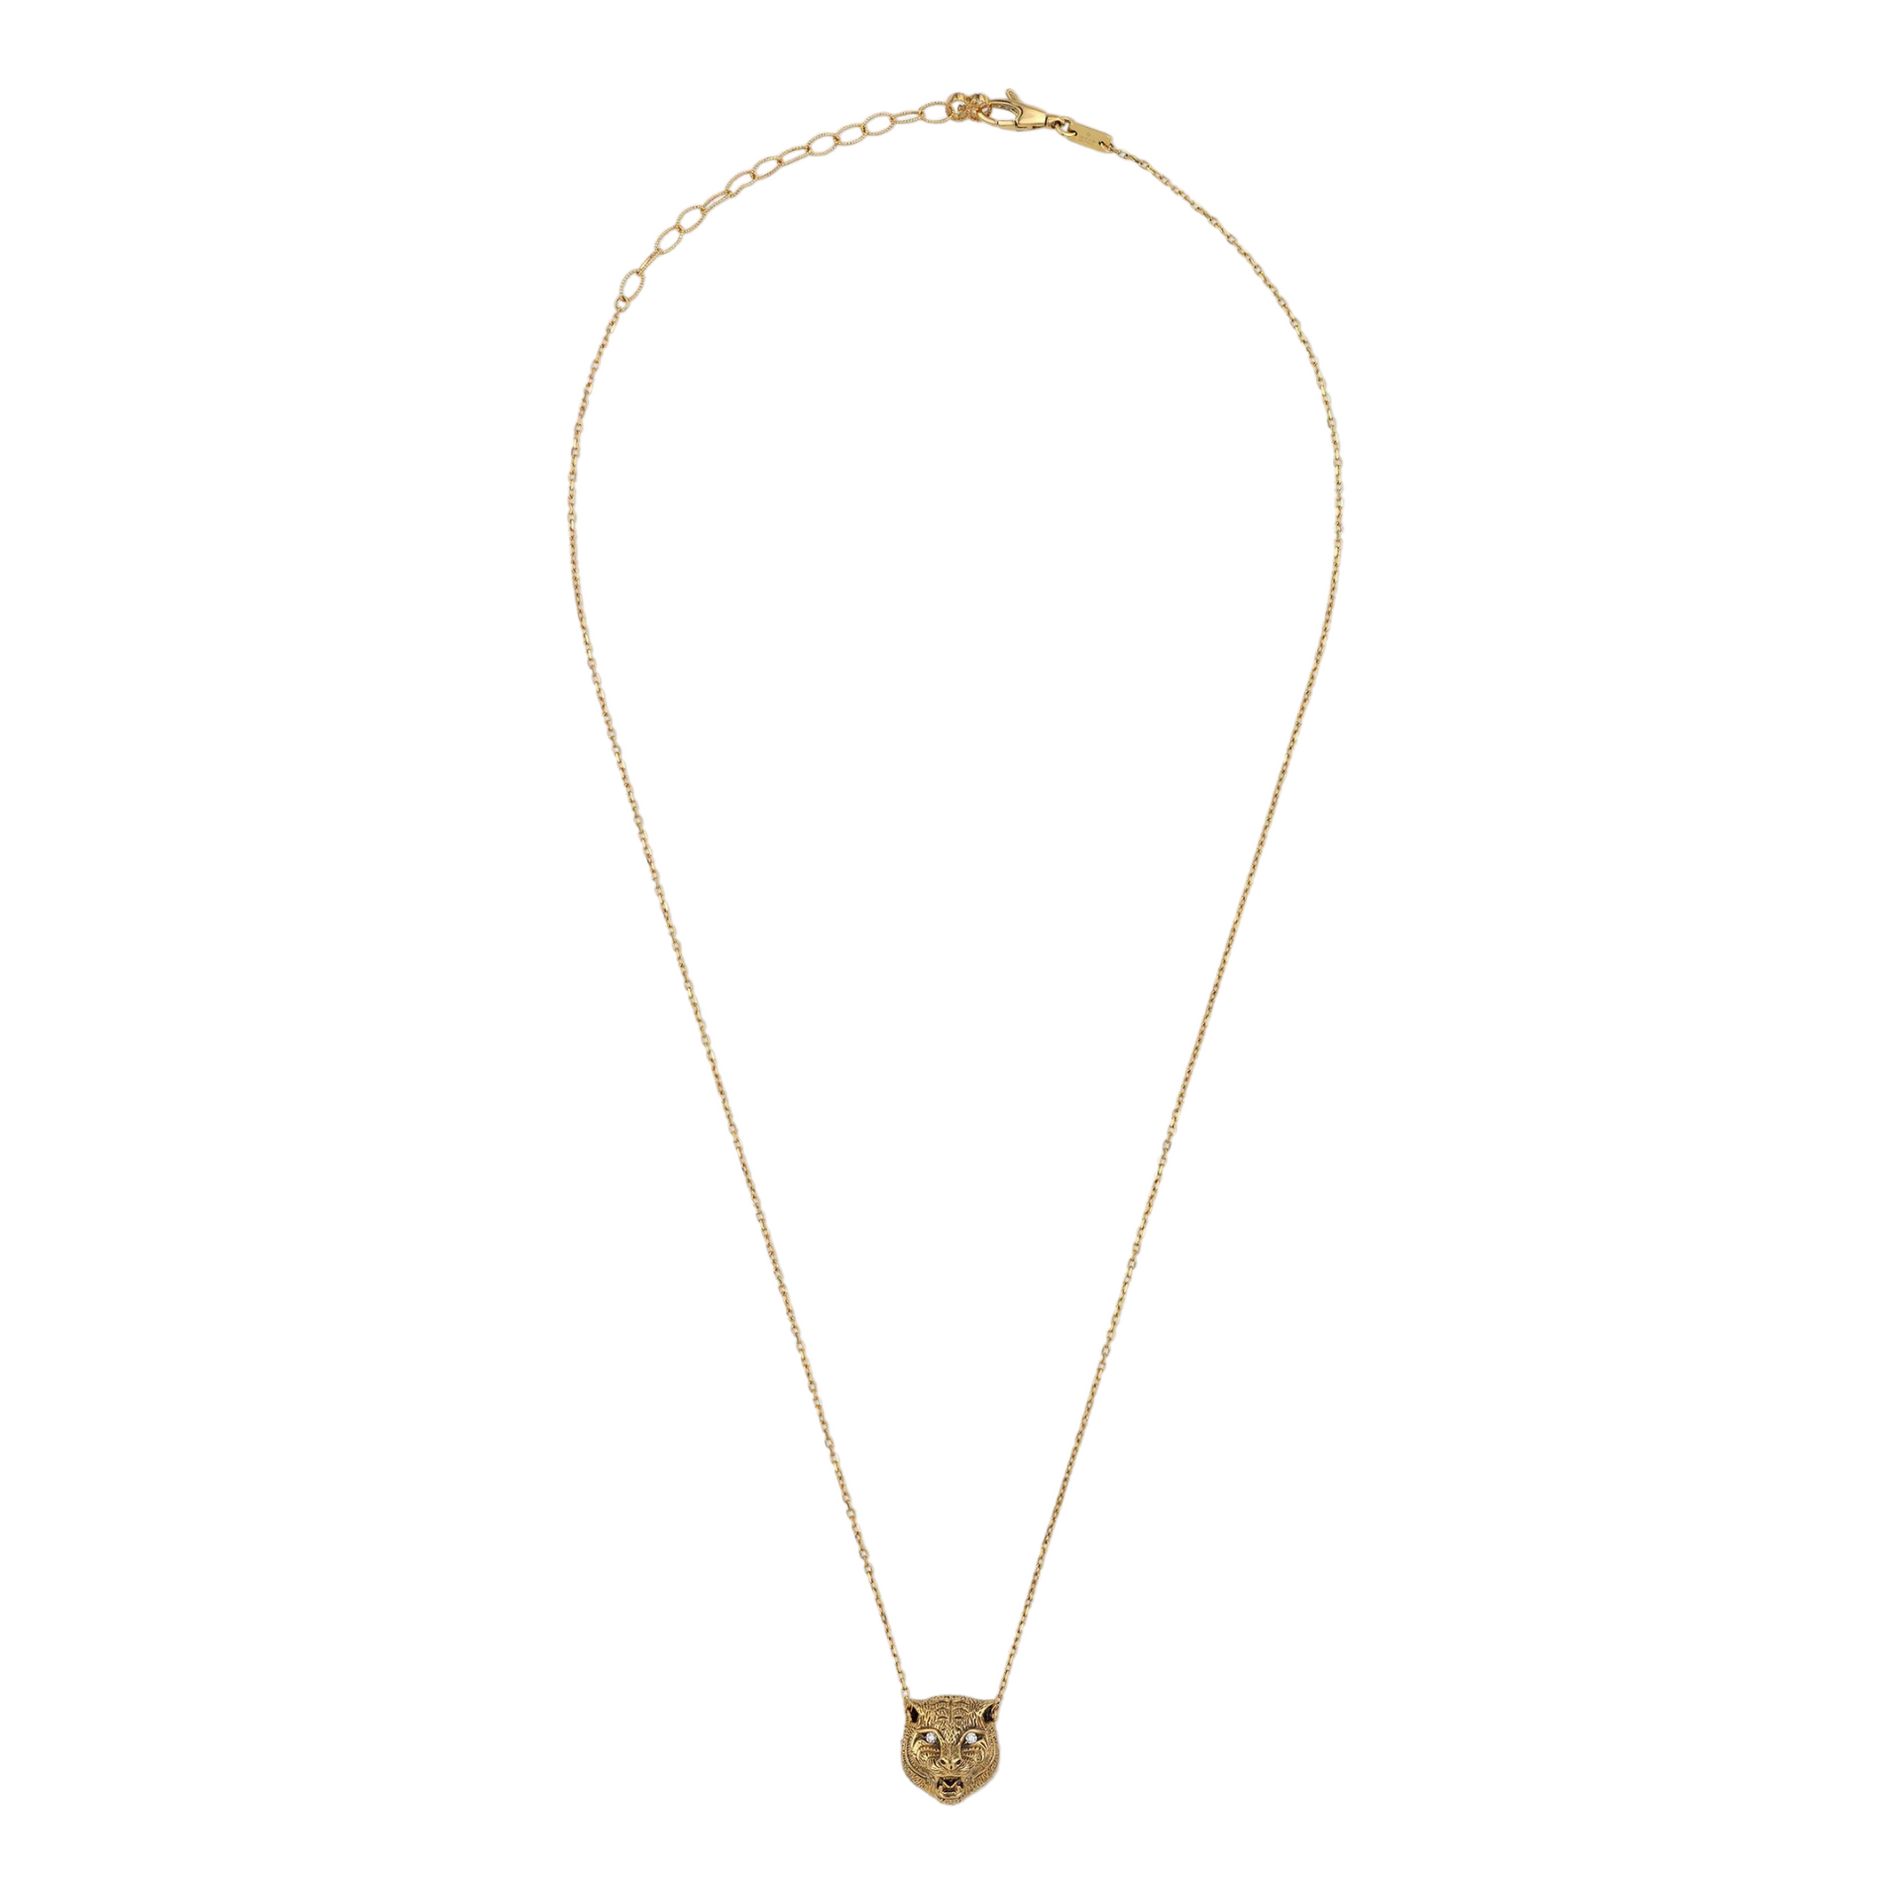 Gucci Le Marché des Merveilles Necklace in 18k Yellow Gold with Onyx and Diamonds - Orsini Jewellers NZ